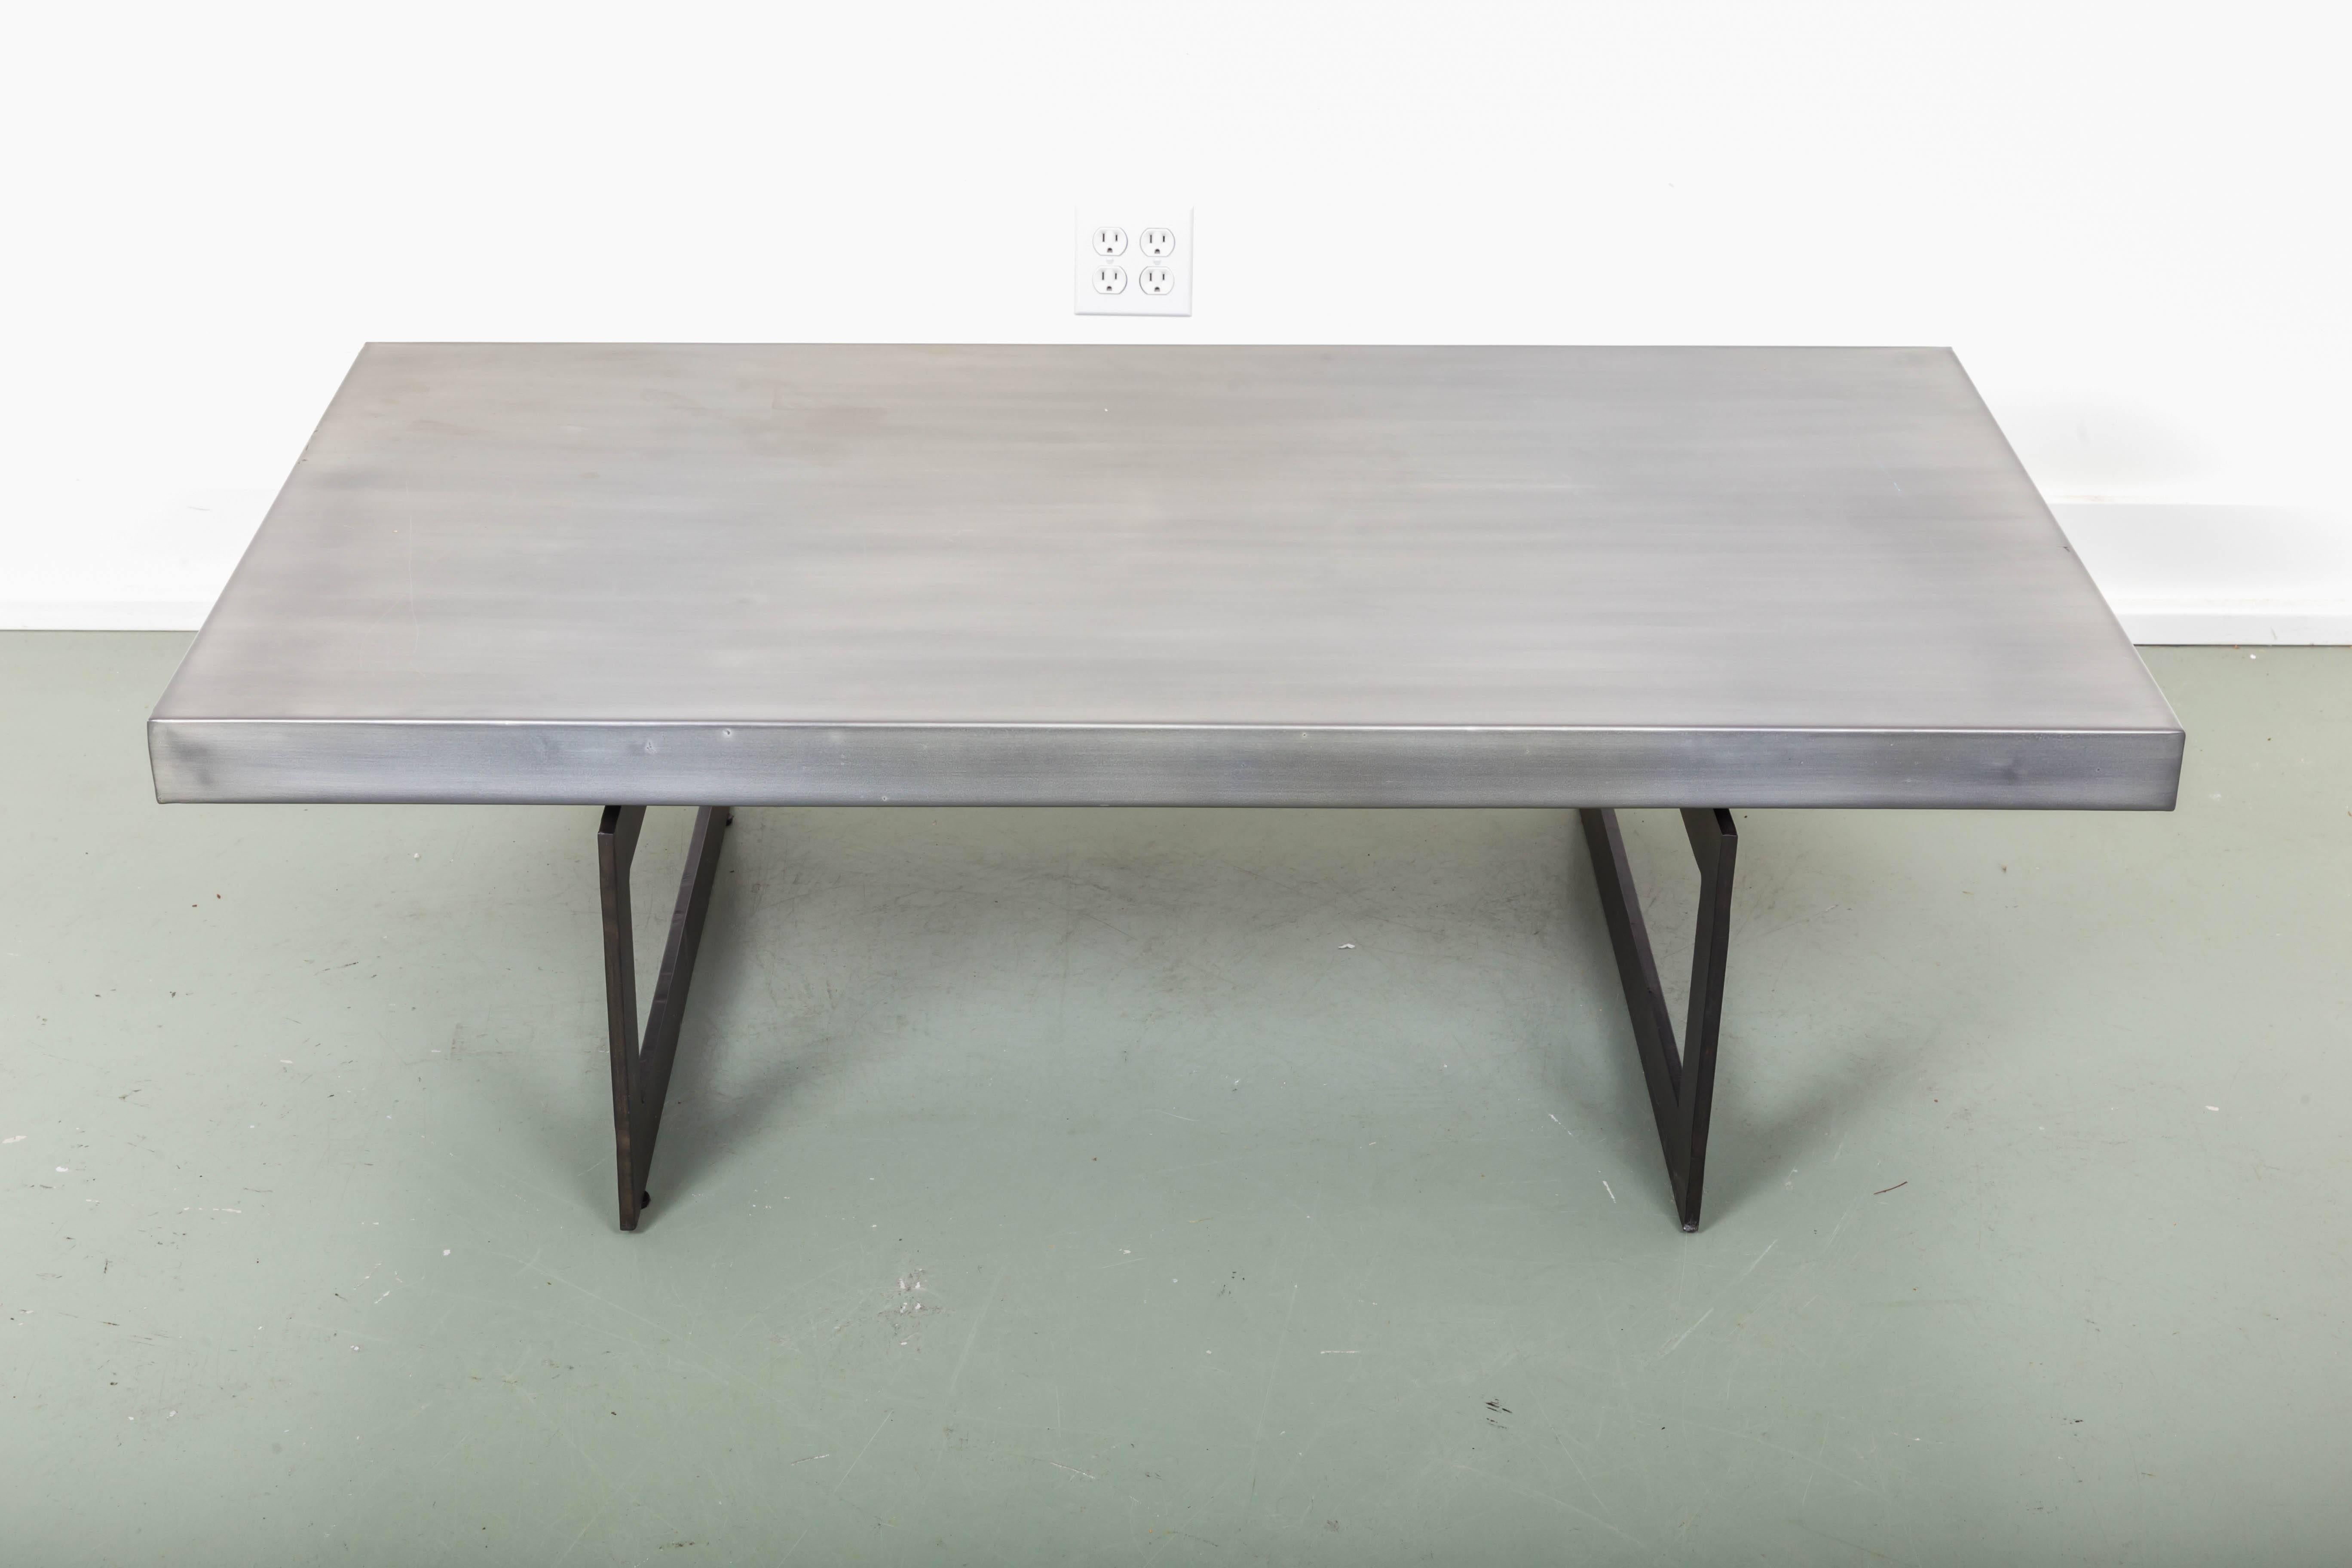 Steel and bronze coffee table. Brushed steel top supported by bronze picture frame style legs.